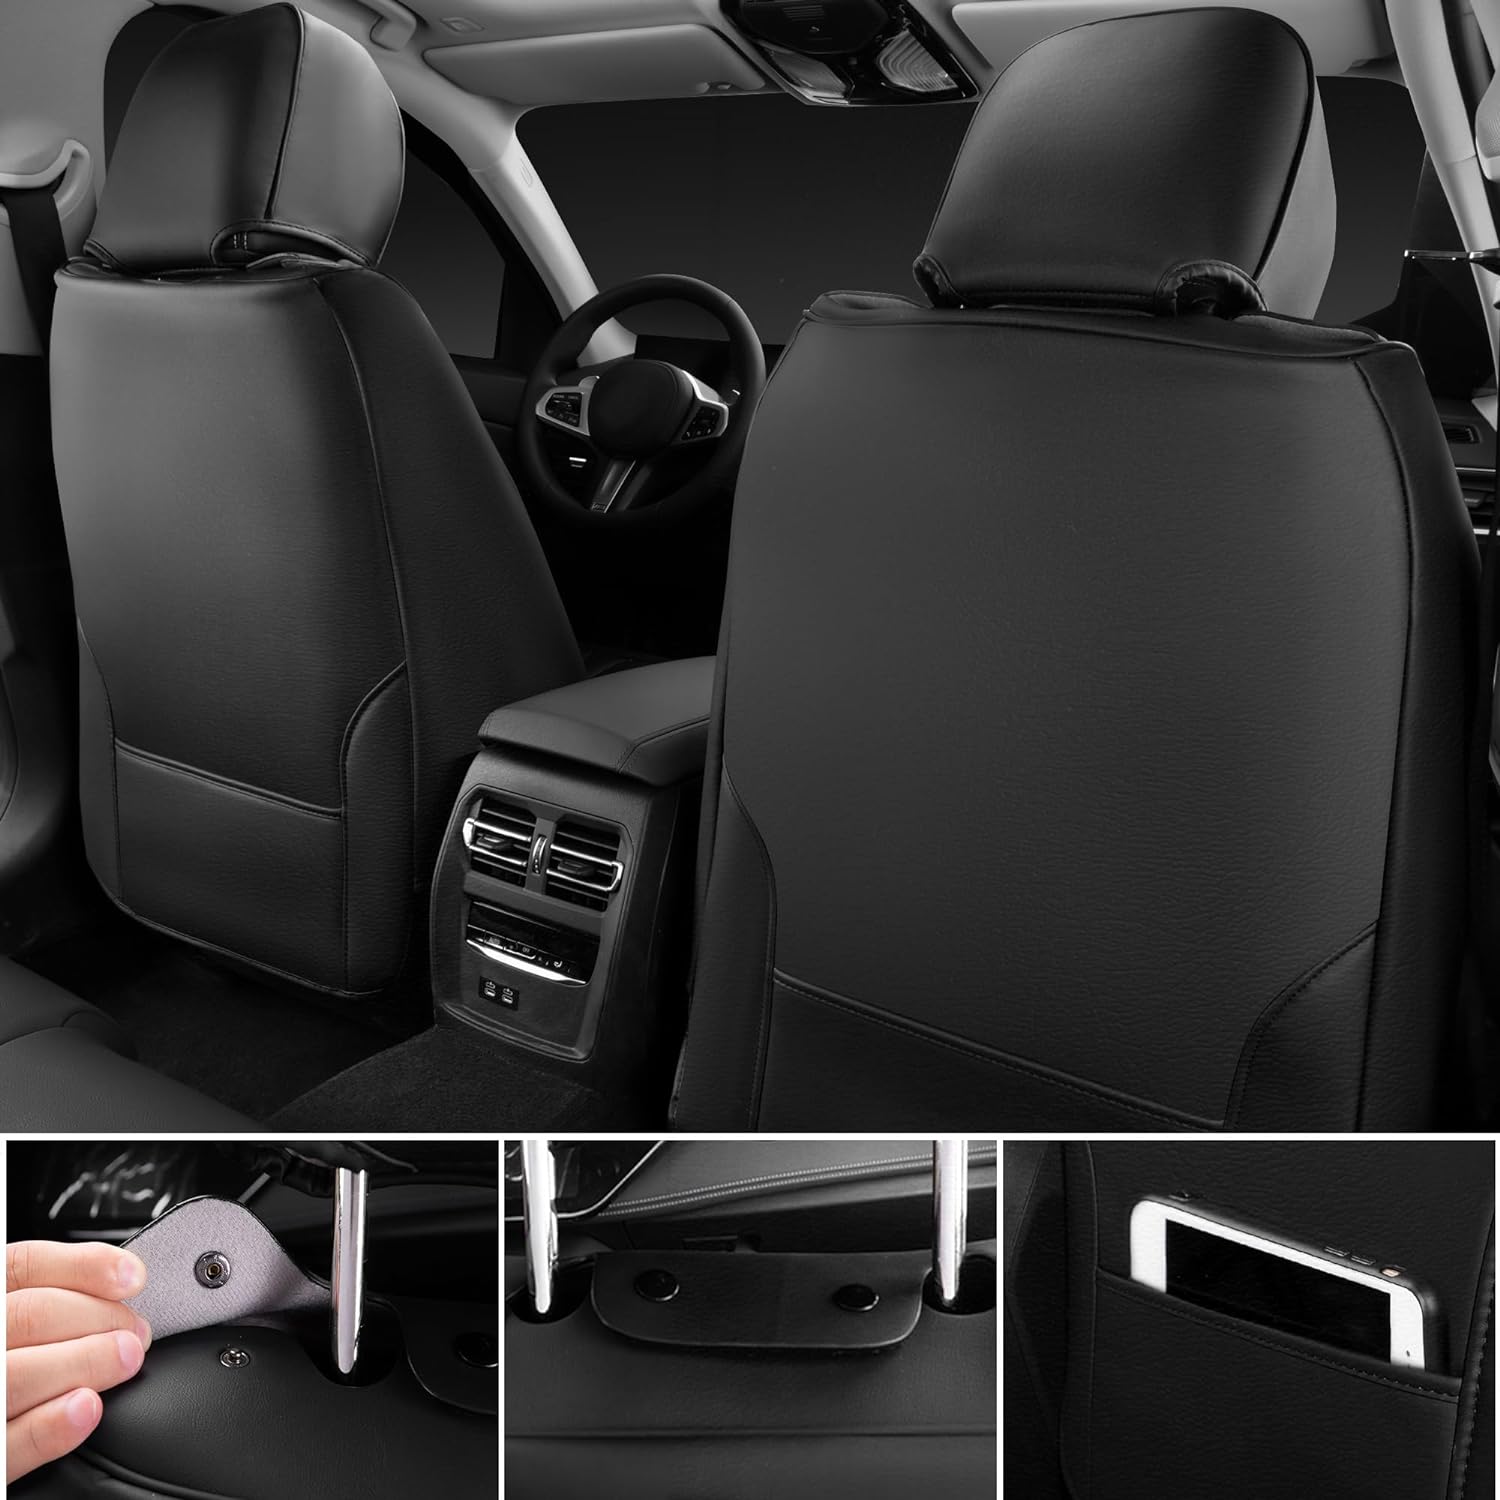 CAR PASS Nappa Leather Car Seat Covers,Breathable and Waterproof for SUV Pick-up Truck Sedan,Universal Anti-Slip Driver Seat Cover with Backrest (Full Seats, Black Chameleon Iridescent Reflective)